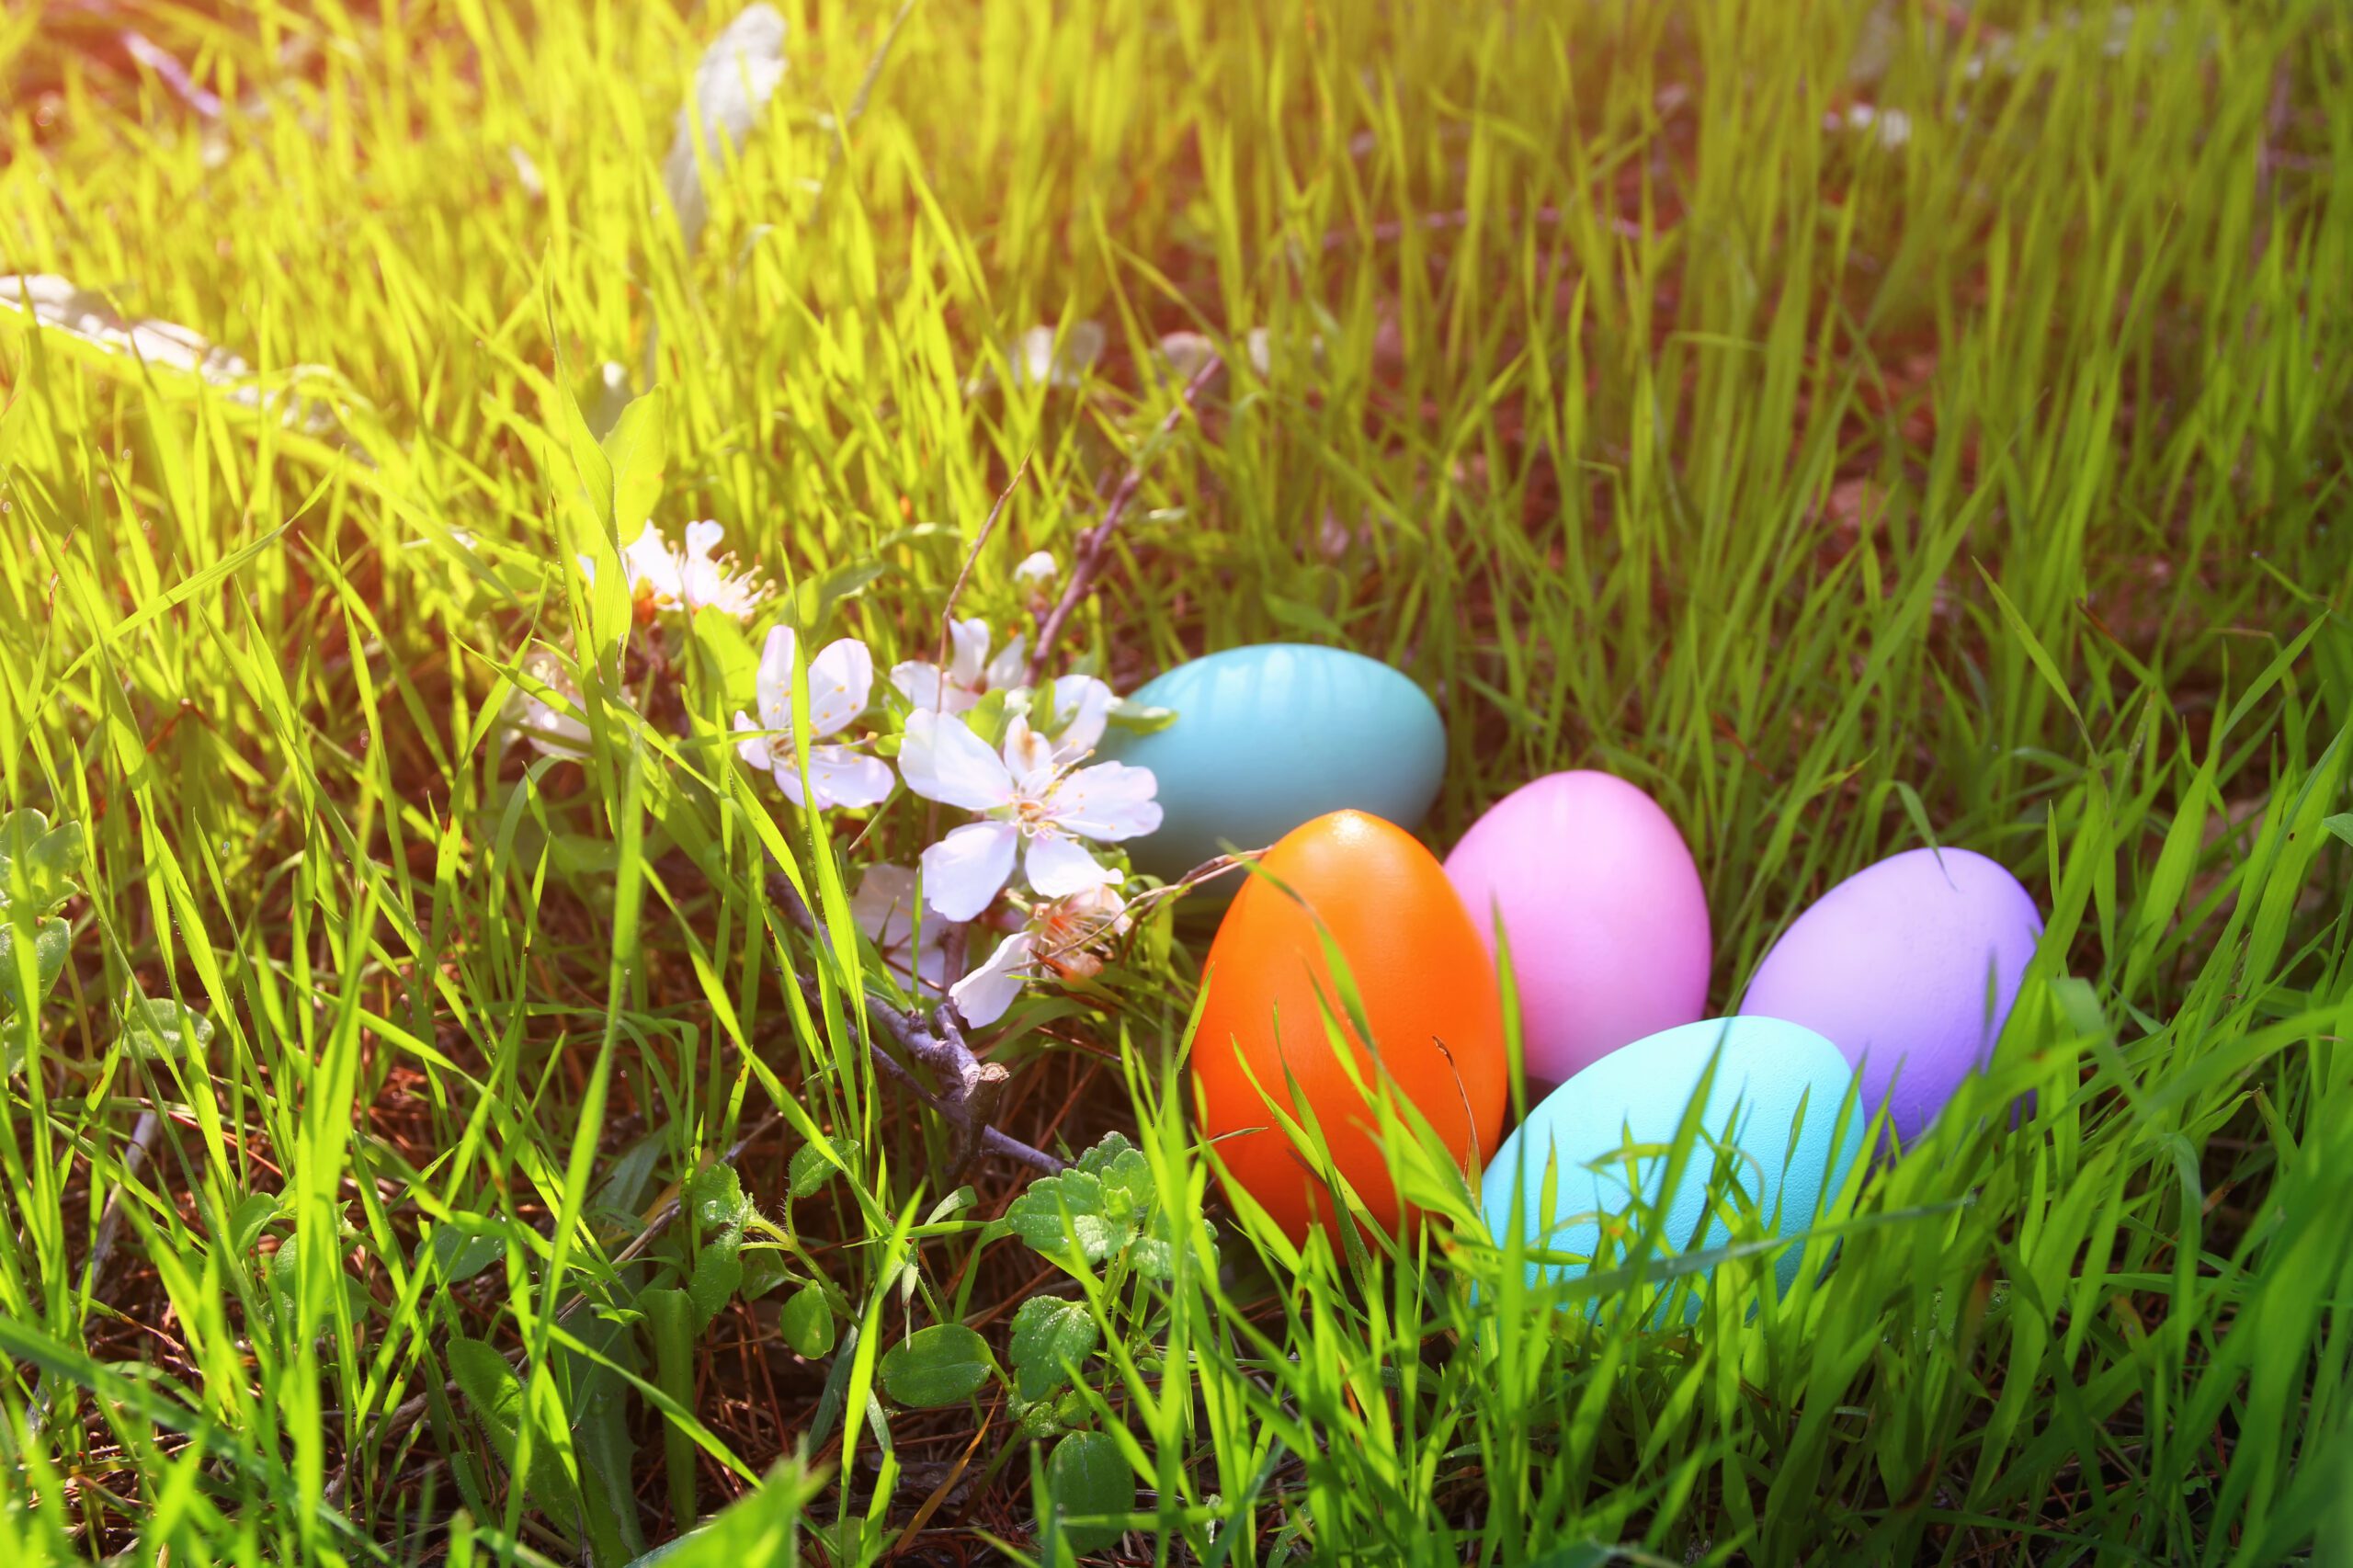 Colored eggs in the grass